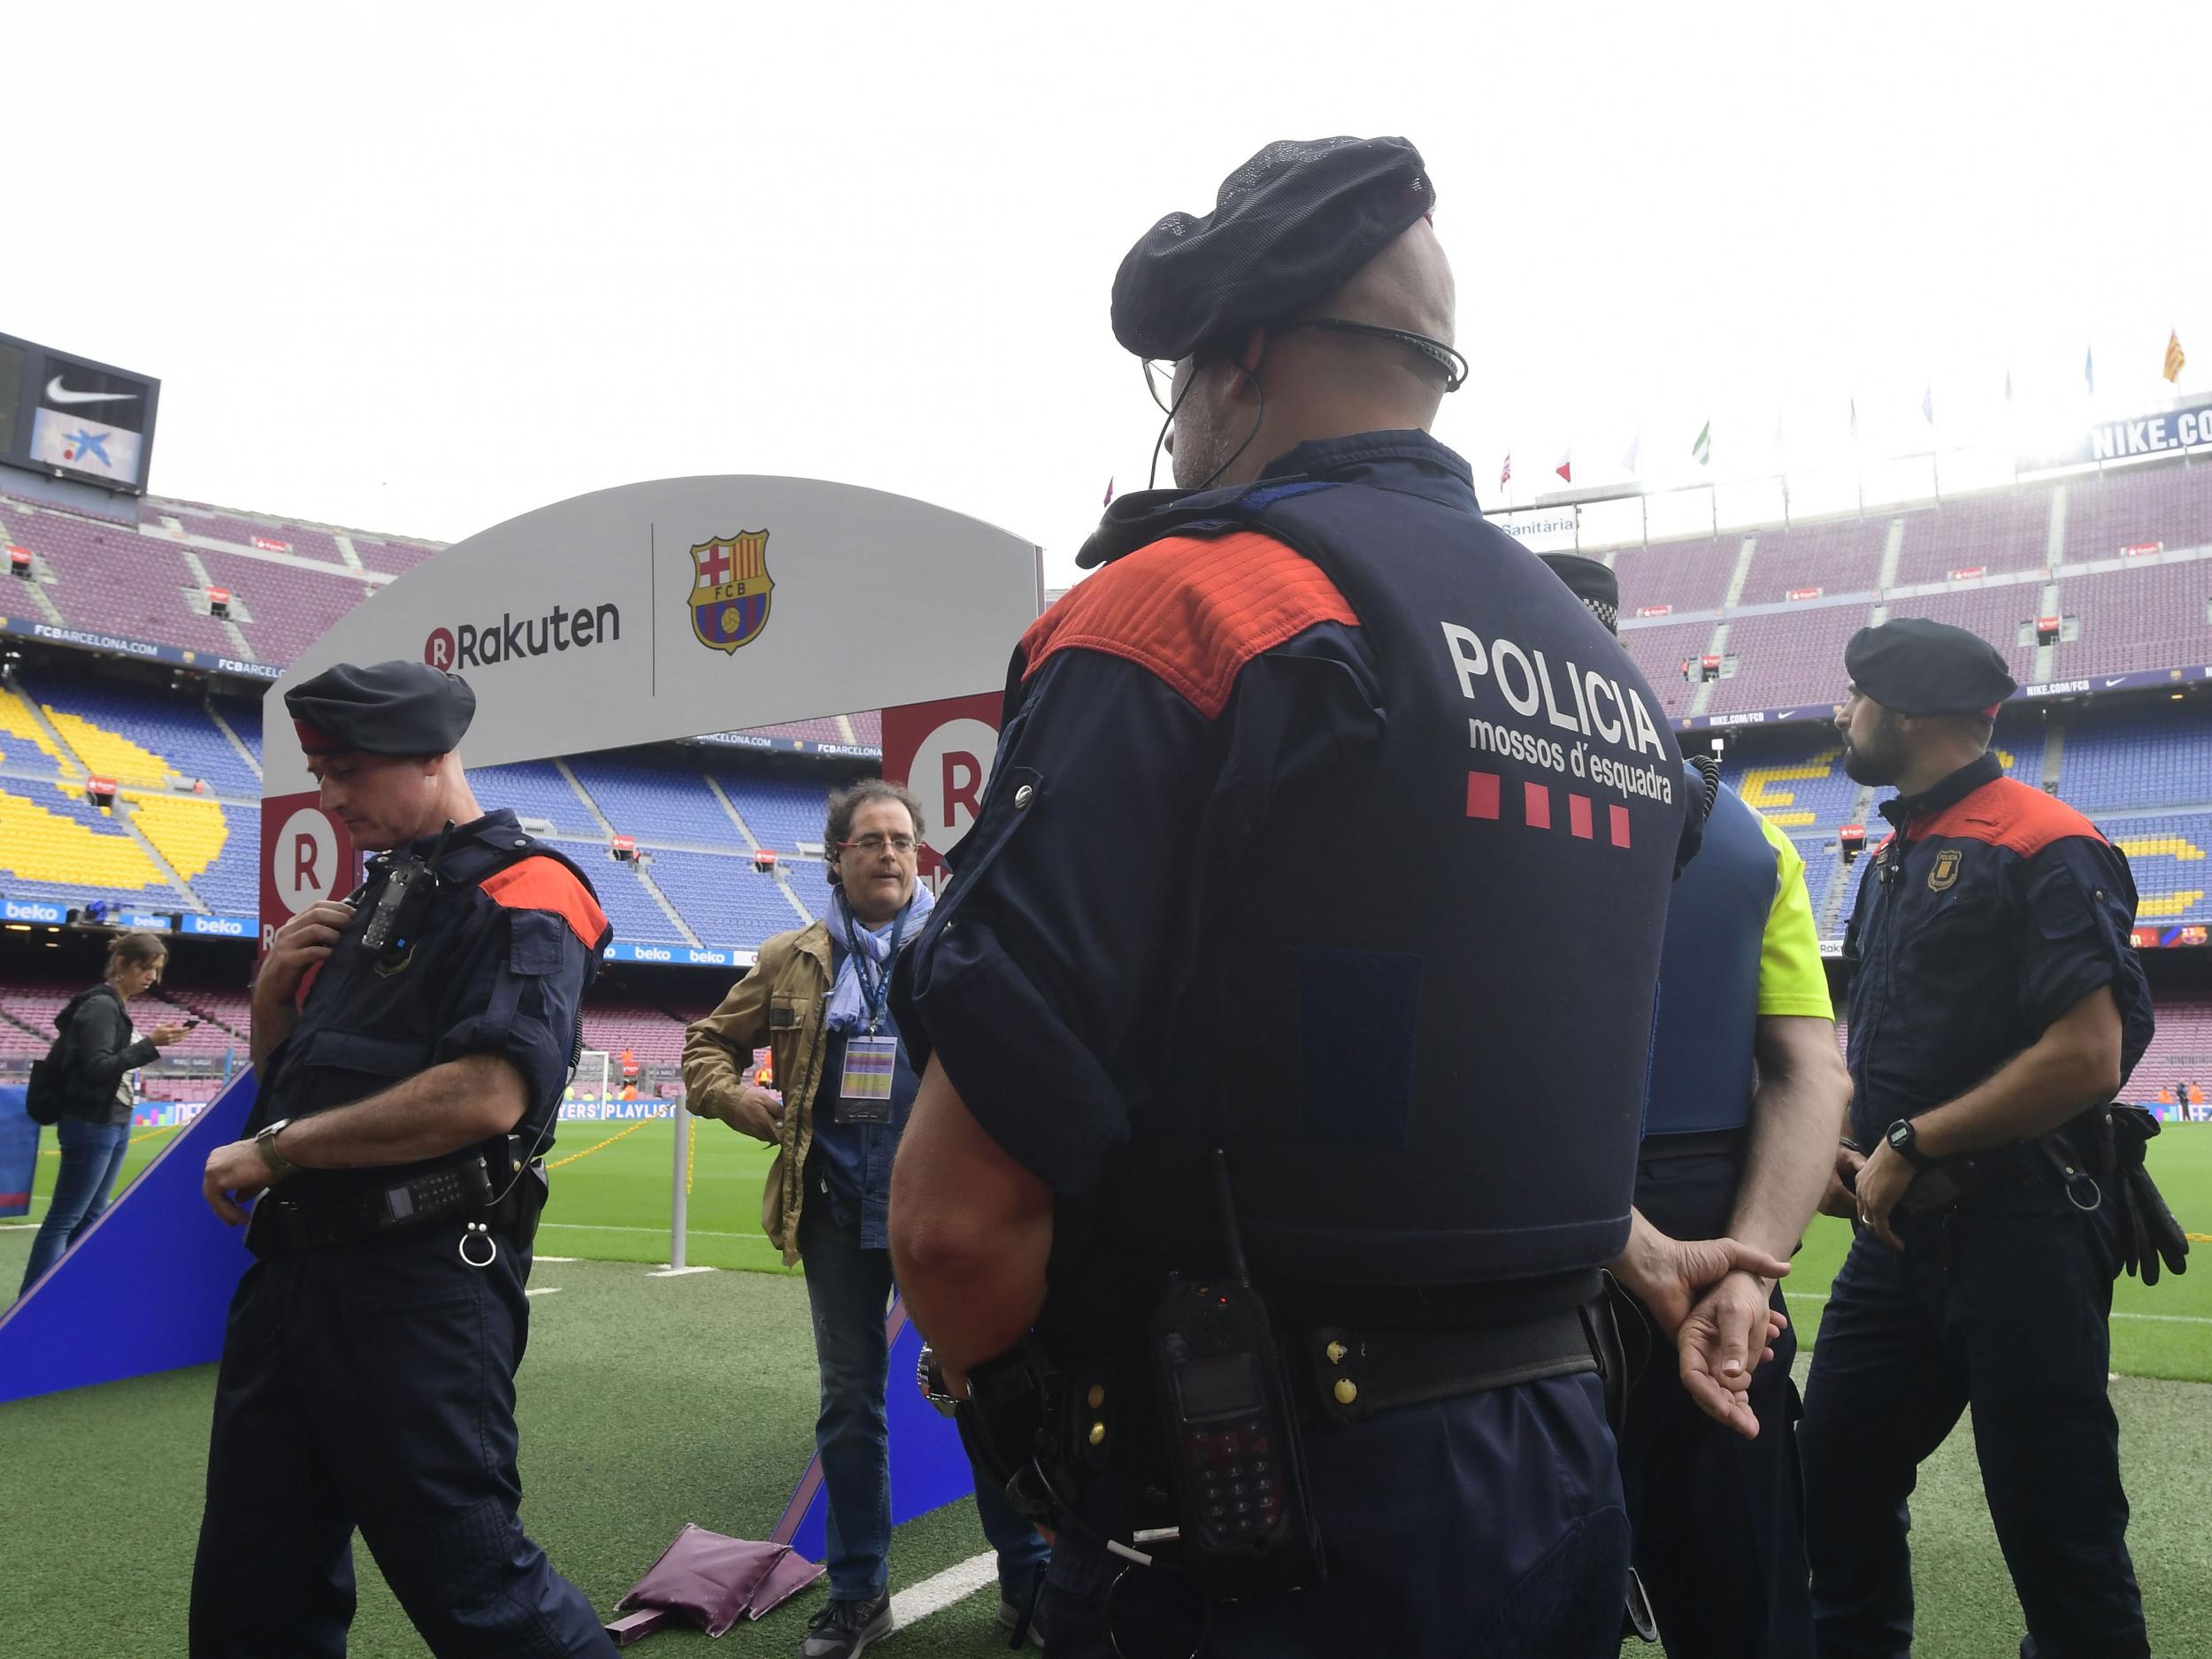 Police at the Nou Camp said the game should go ahead